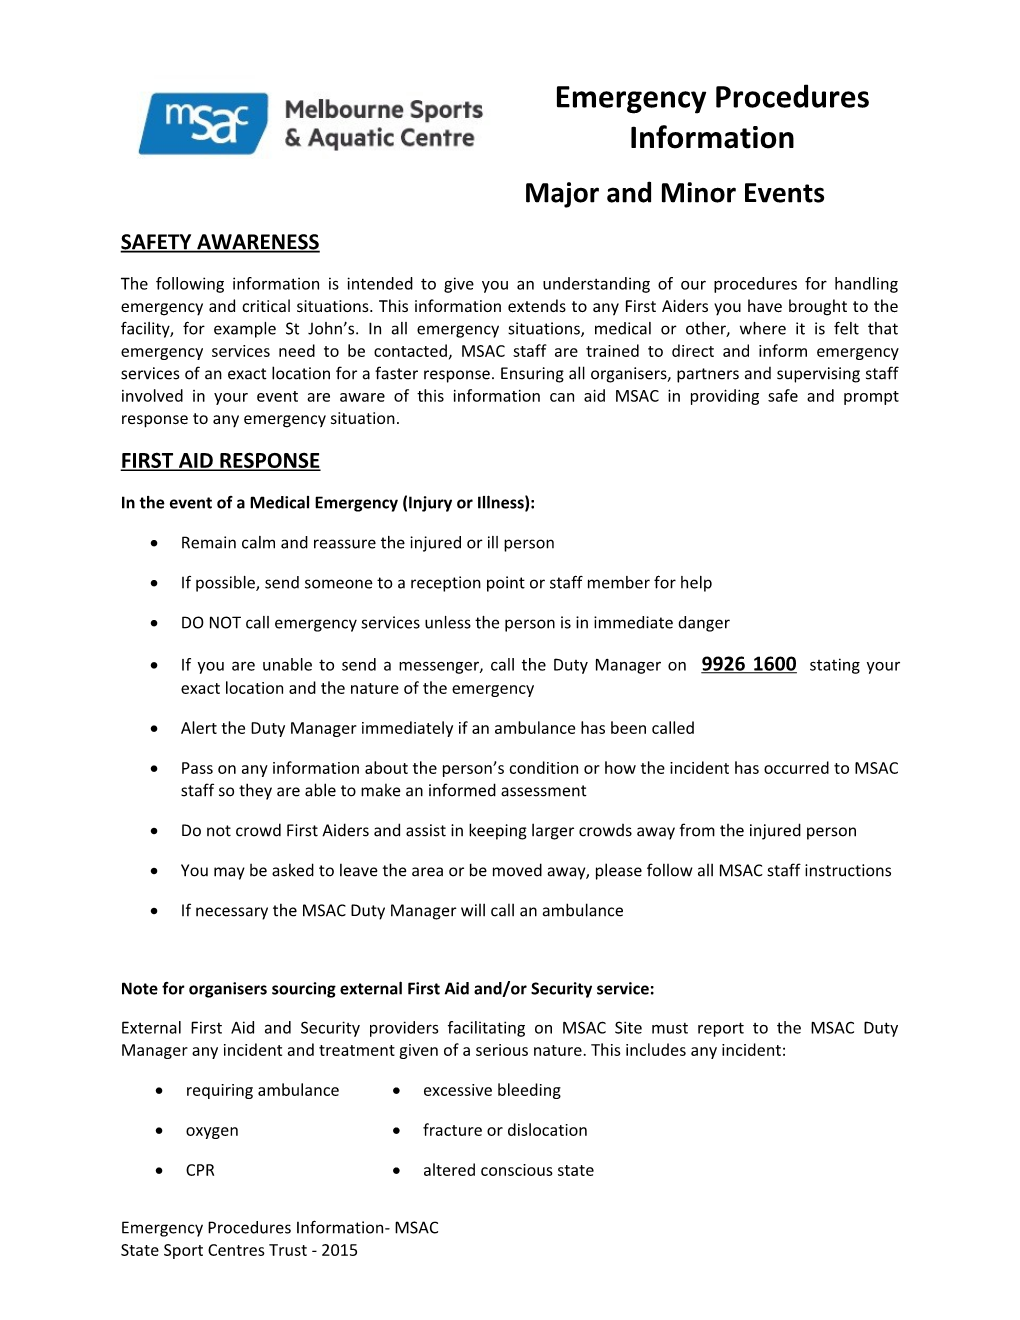 MSAC Emergency Procedures for Major and Minor Events